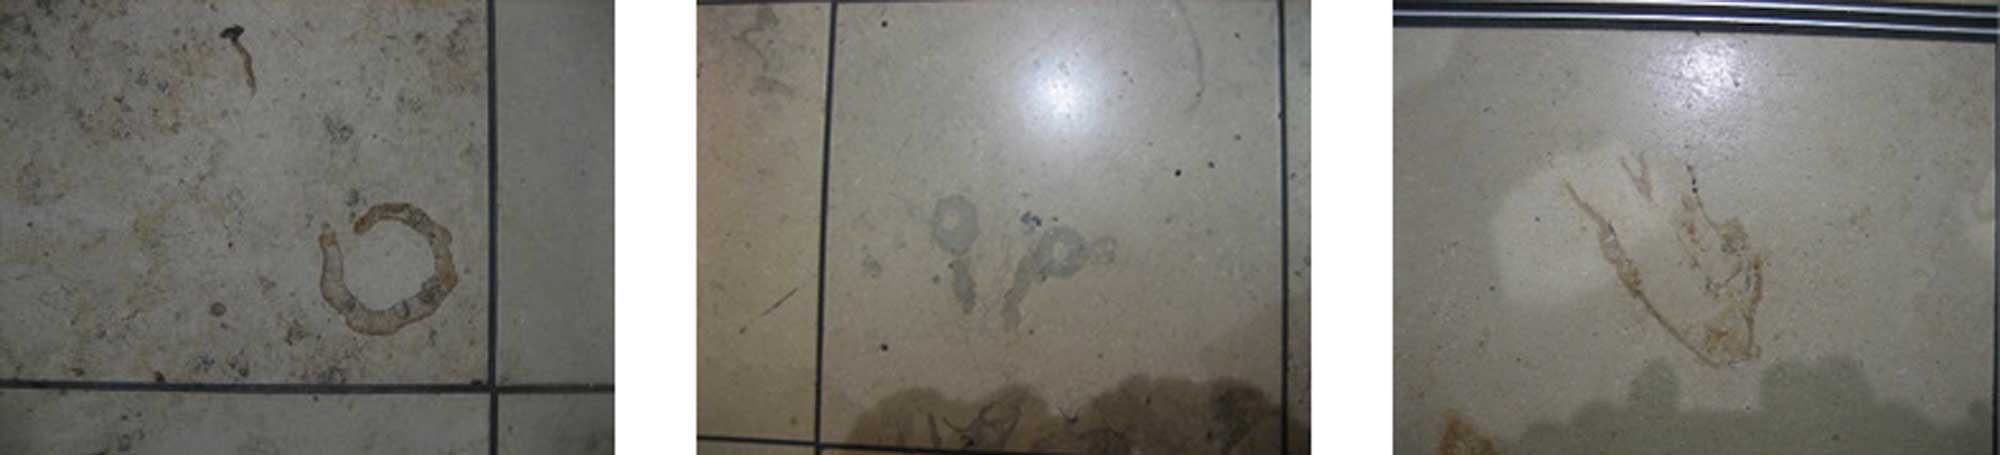 Photographs of rudist fossils preserved in airport tiles.